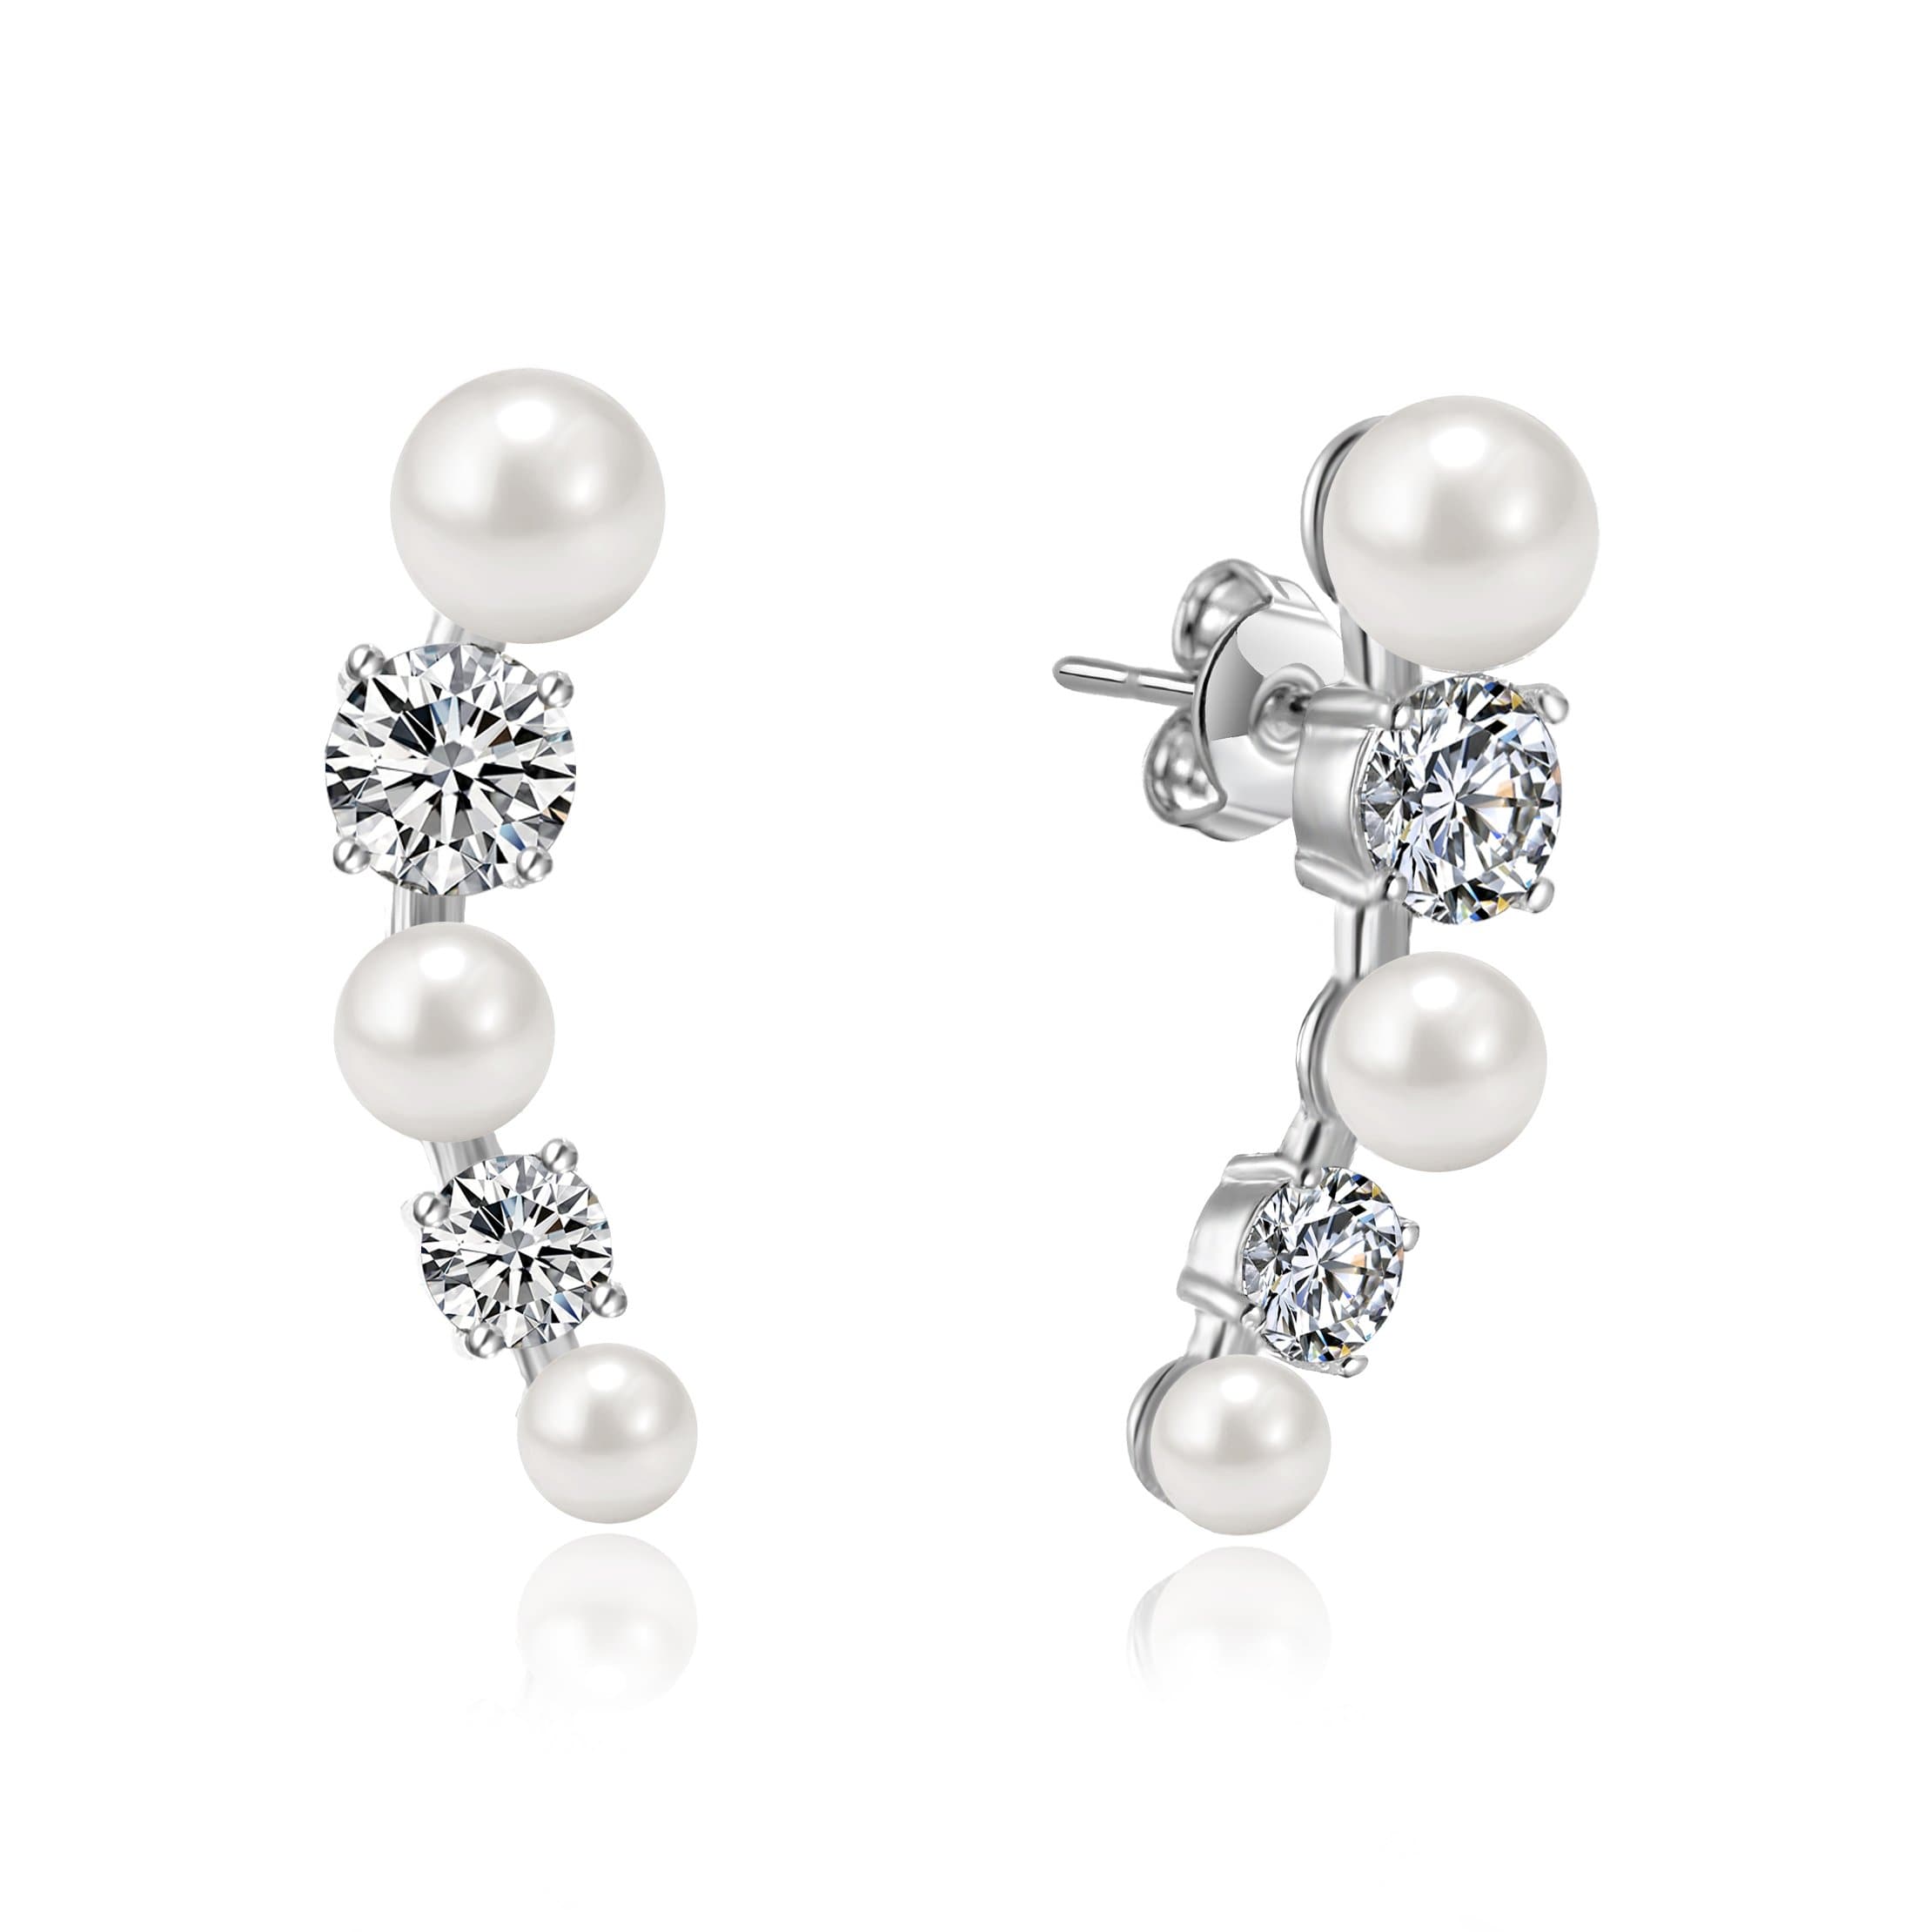 White Pearl Climber Earrings Created with Zircondia® Crystals by Philip Jones Jewellery